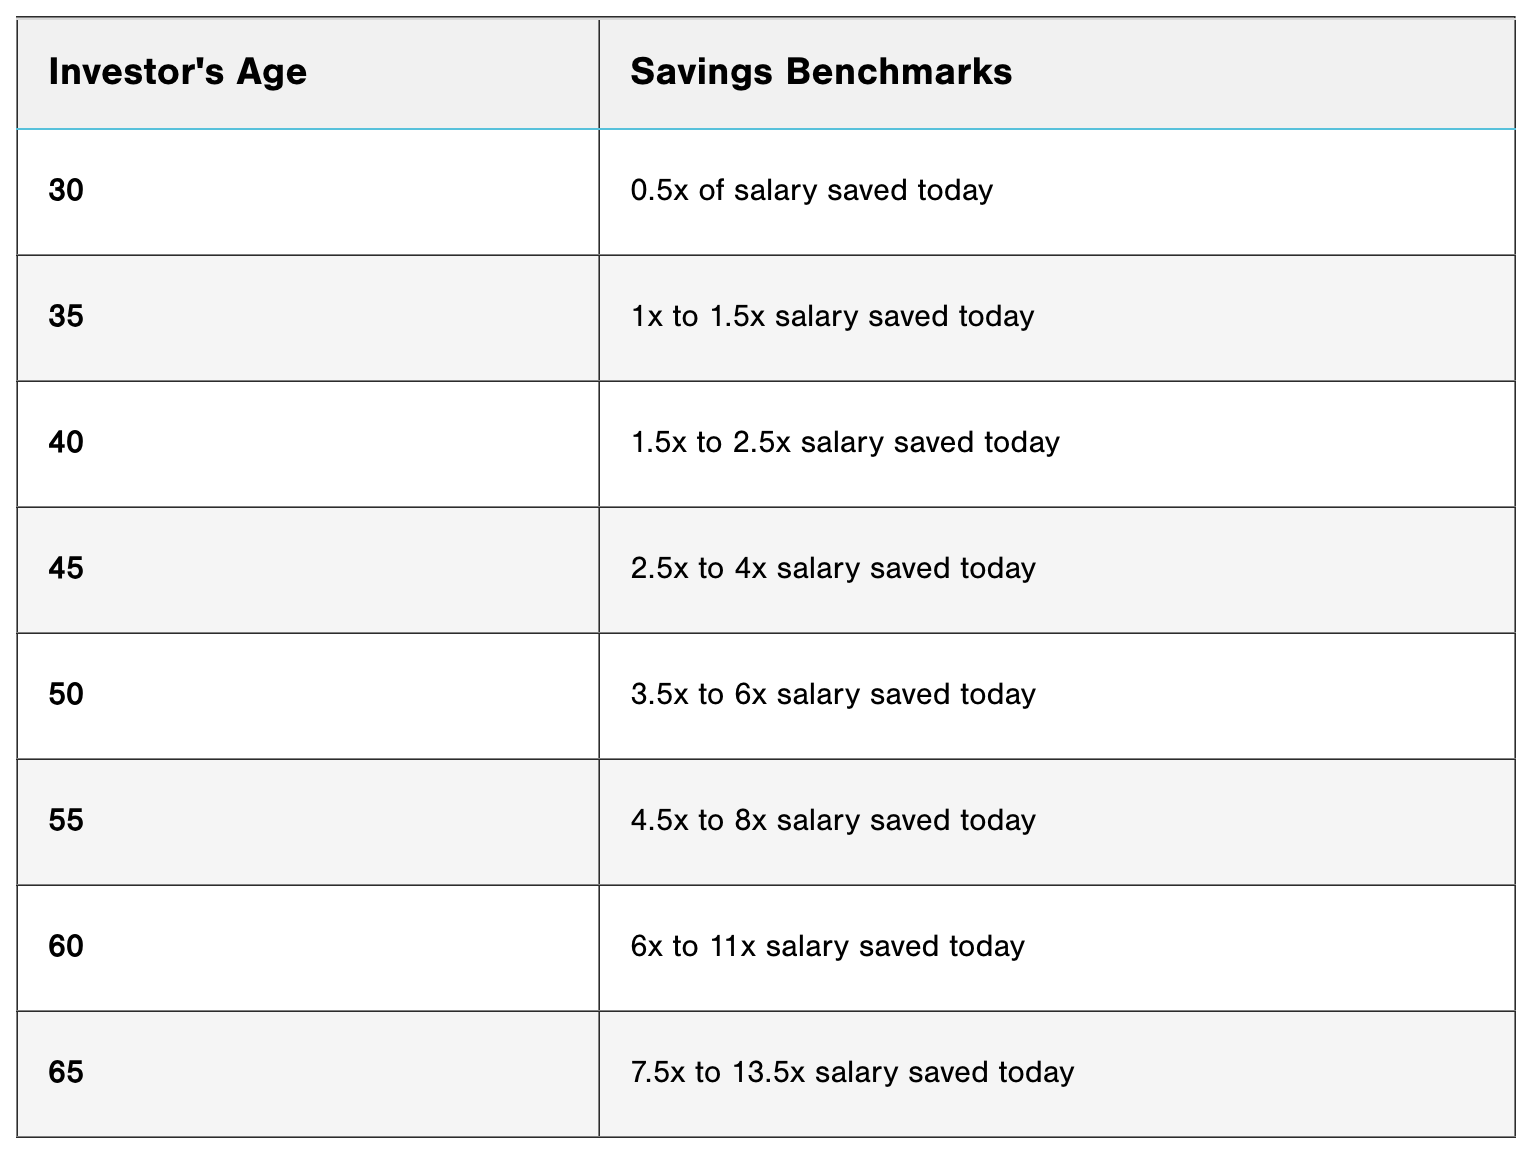 ©T.Rowe Price: Savings benchmarks by investor age. 